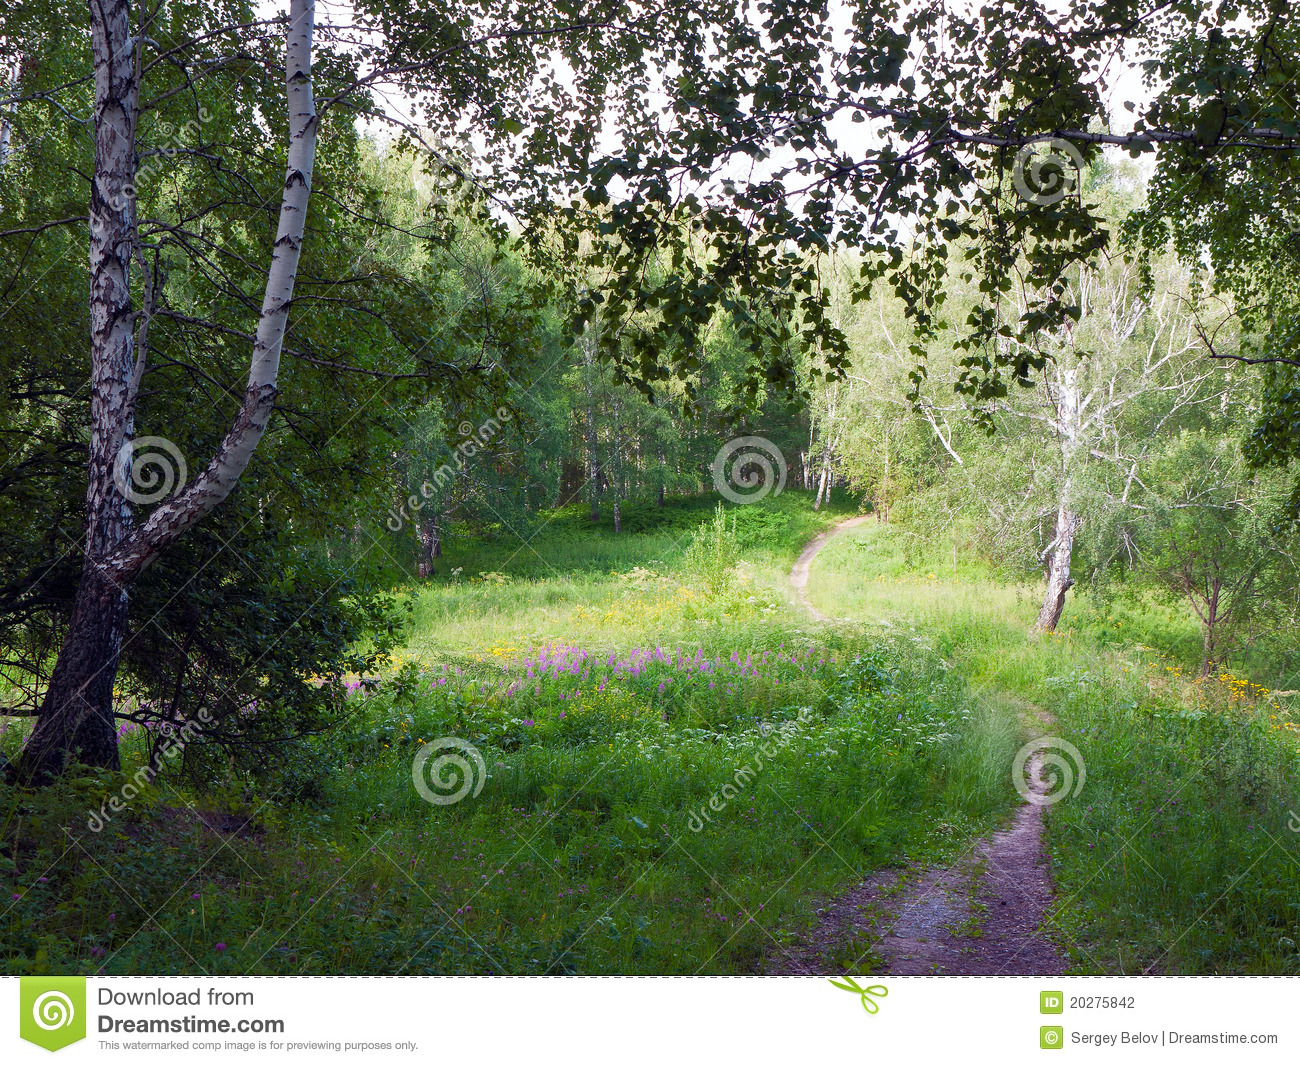 Flower Meadow In The Woods  Stock Photography   Image  20275842